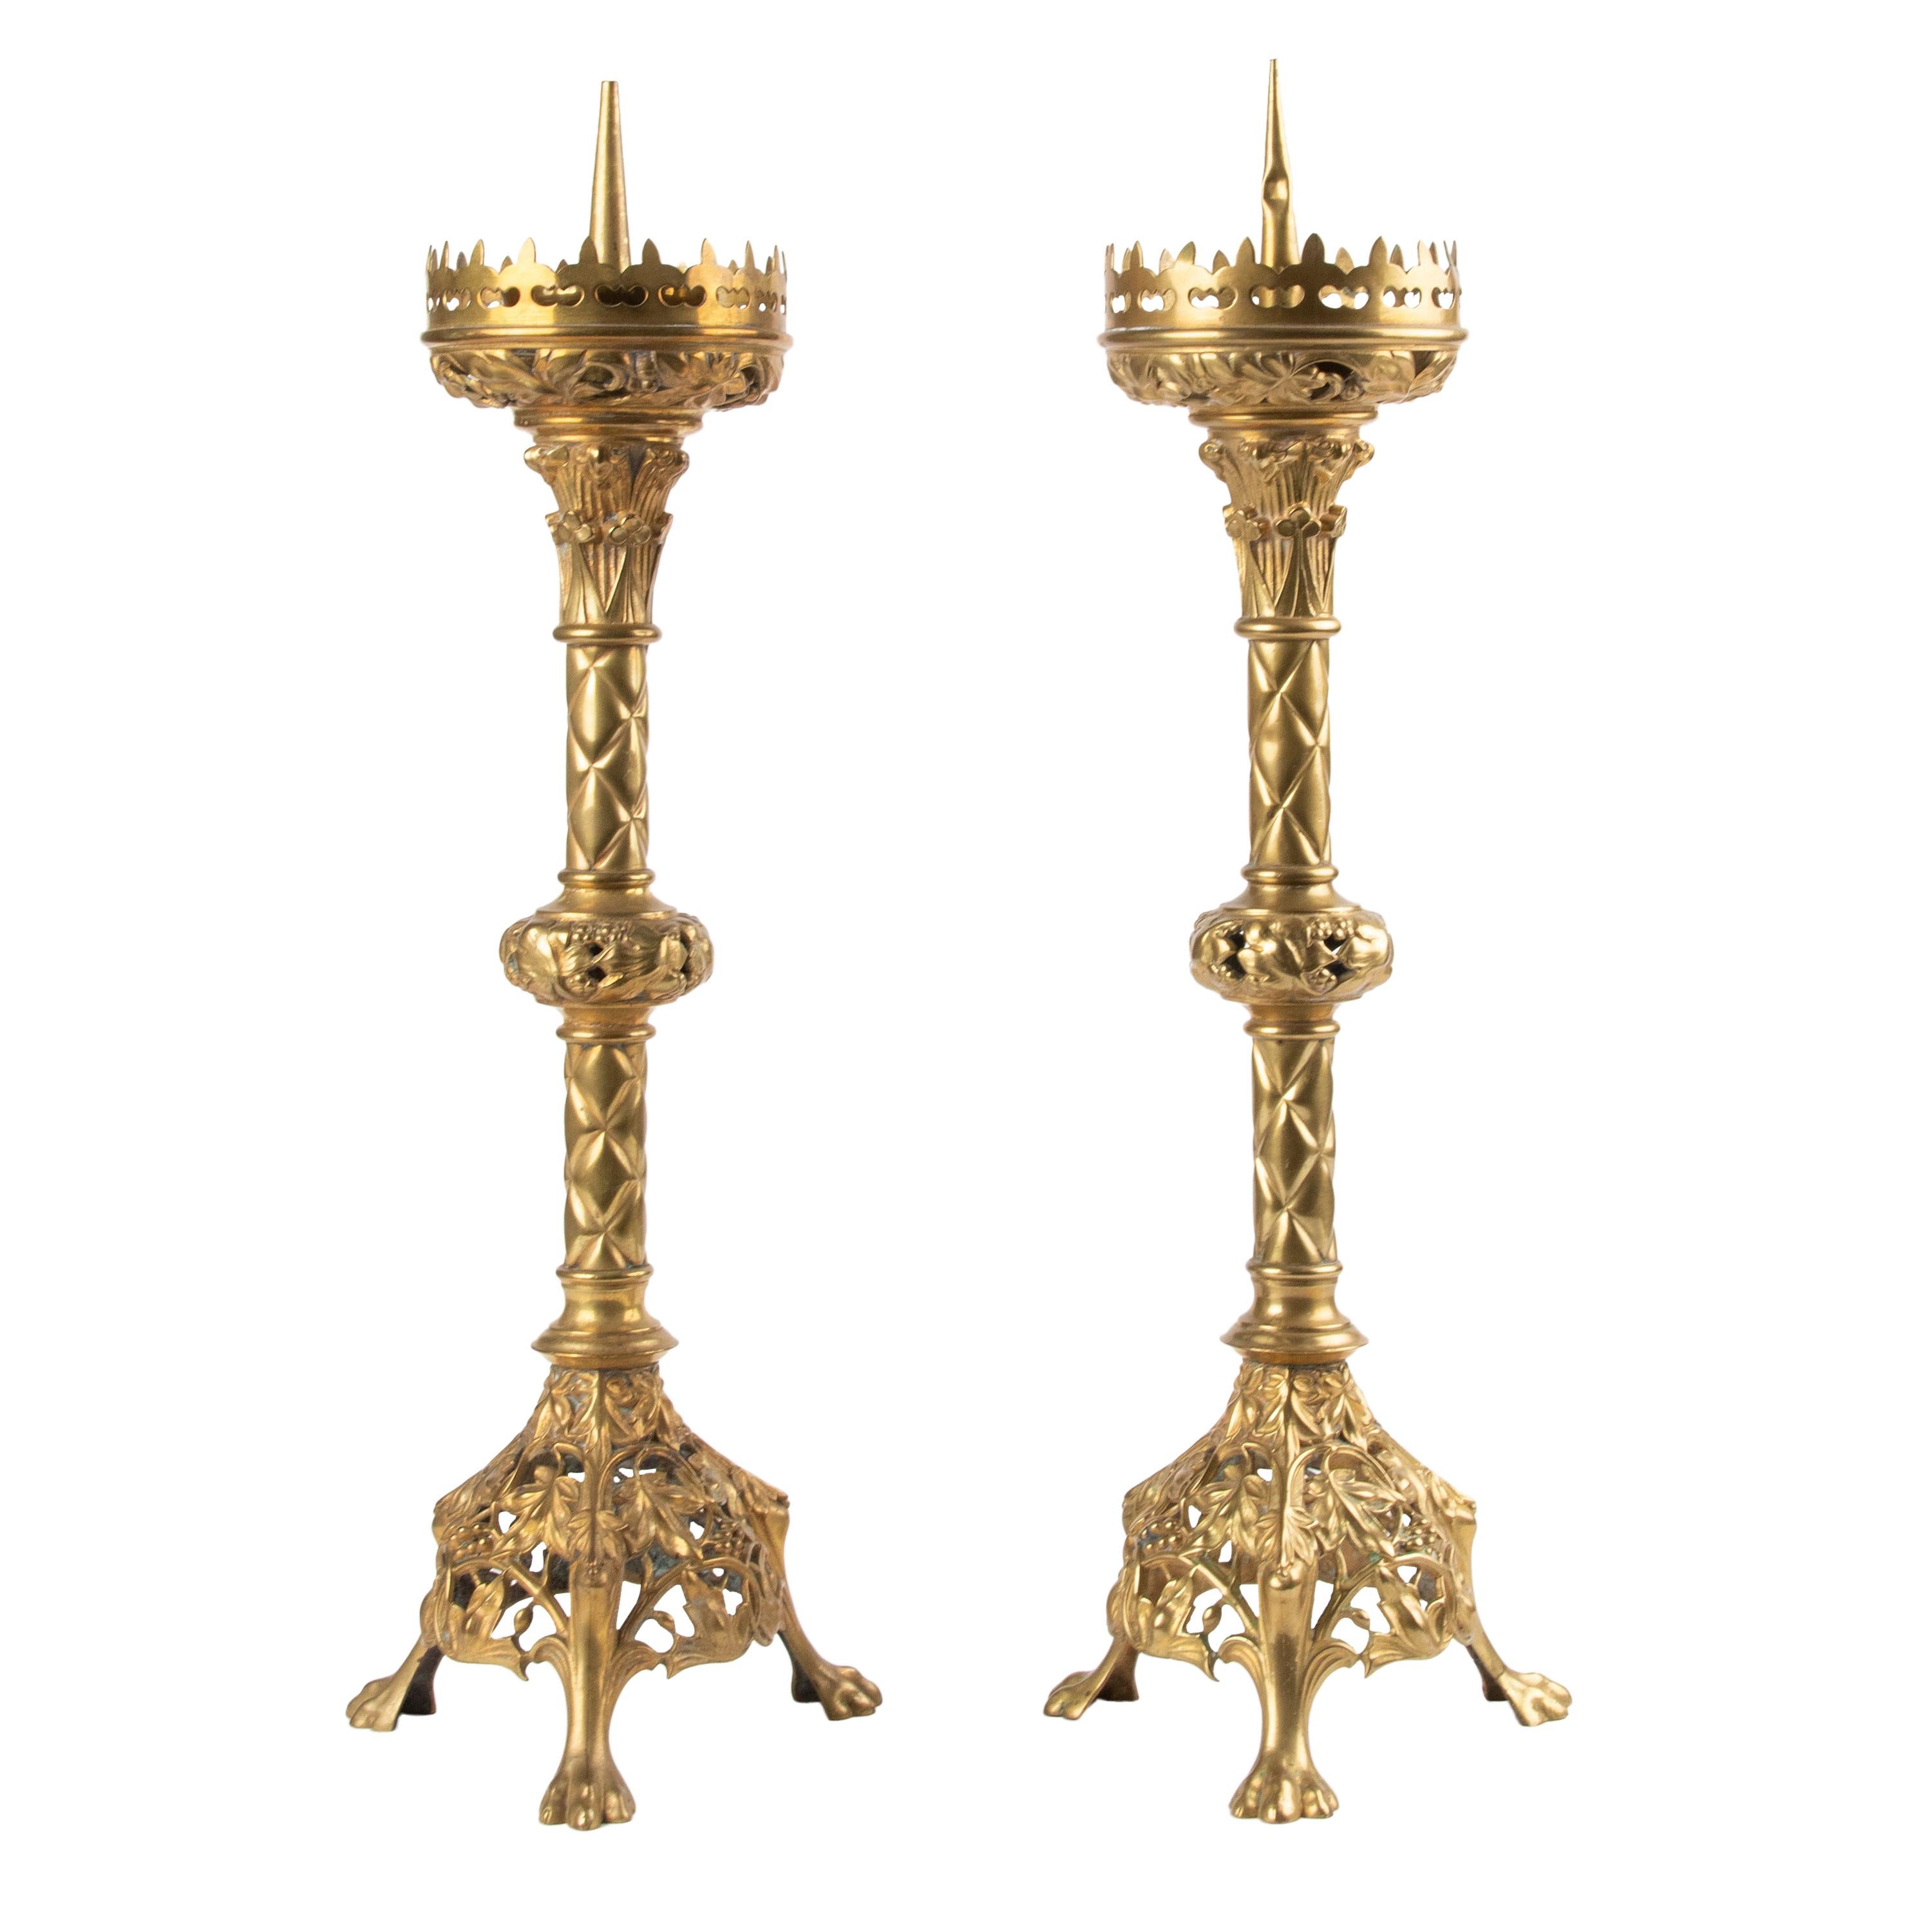 Pair of French Gilt Bronze Candlesticks Gothic Style, End 19th Century